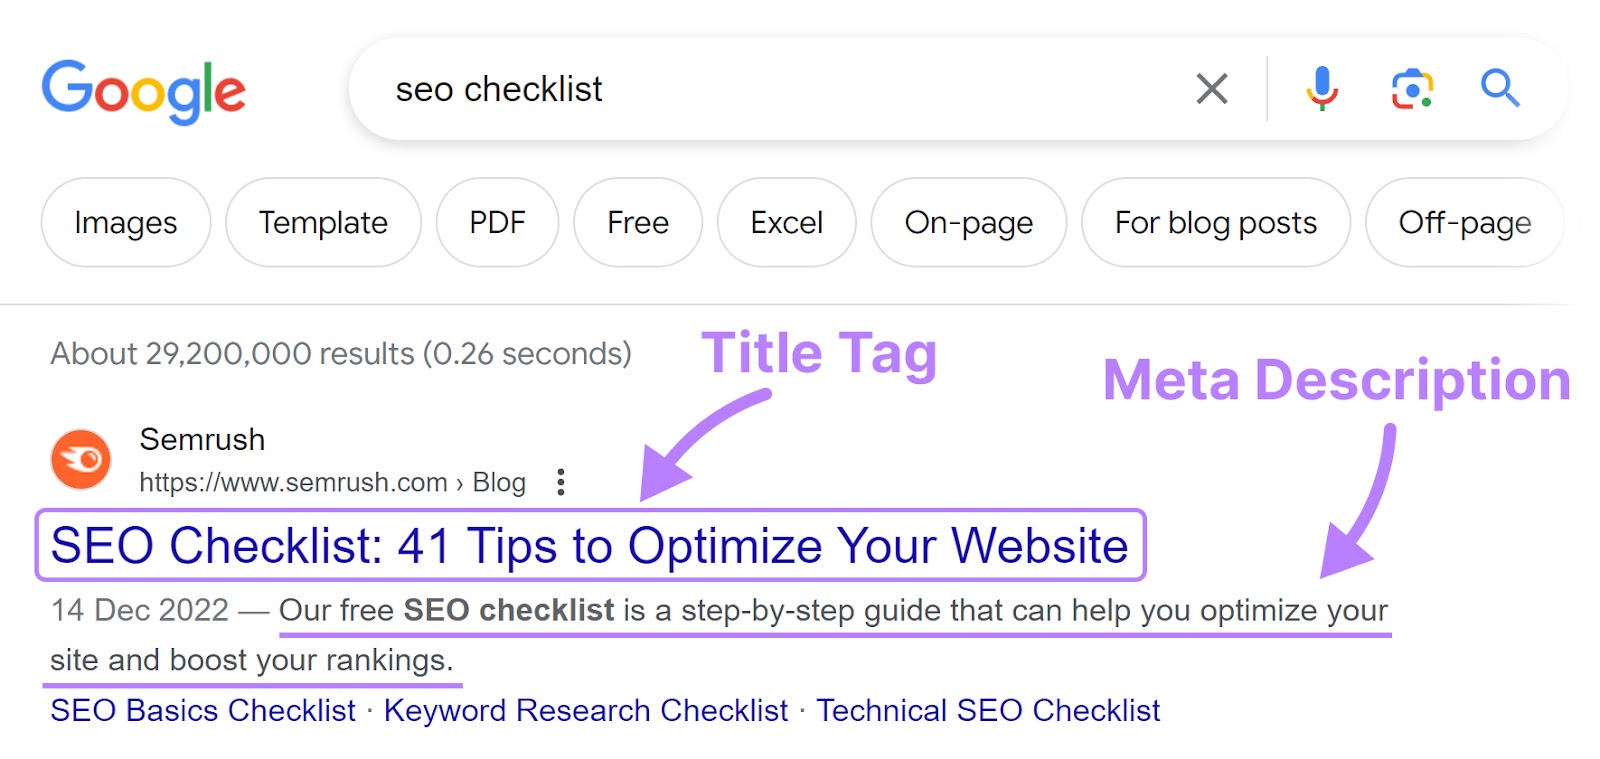 Title tag and meta description highlighted under Semrush's blog on Google SERP